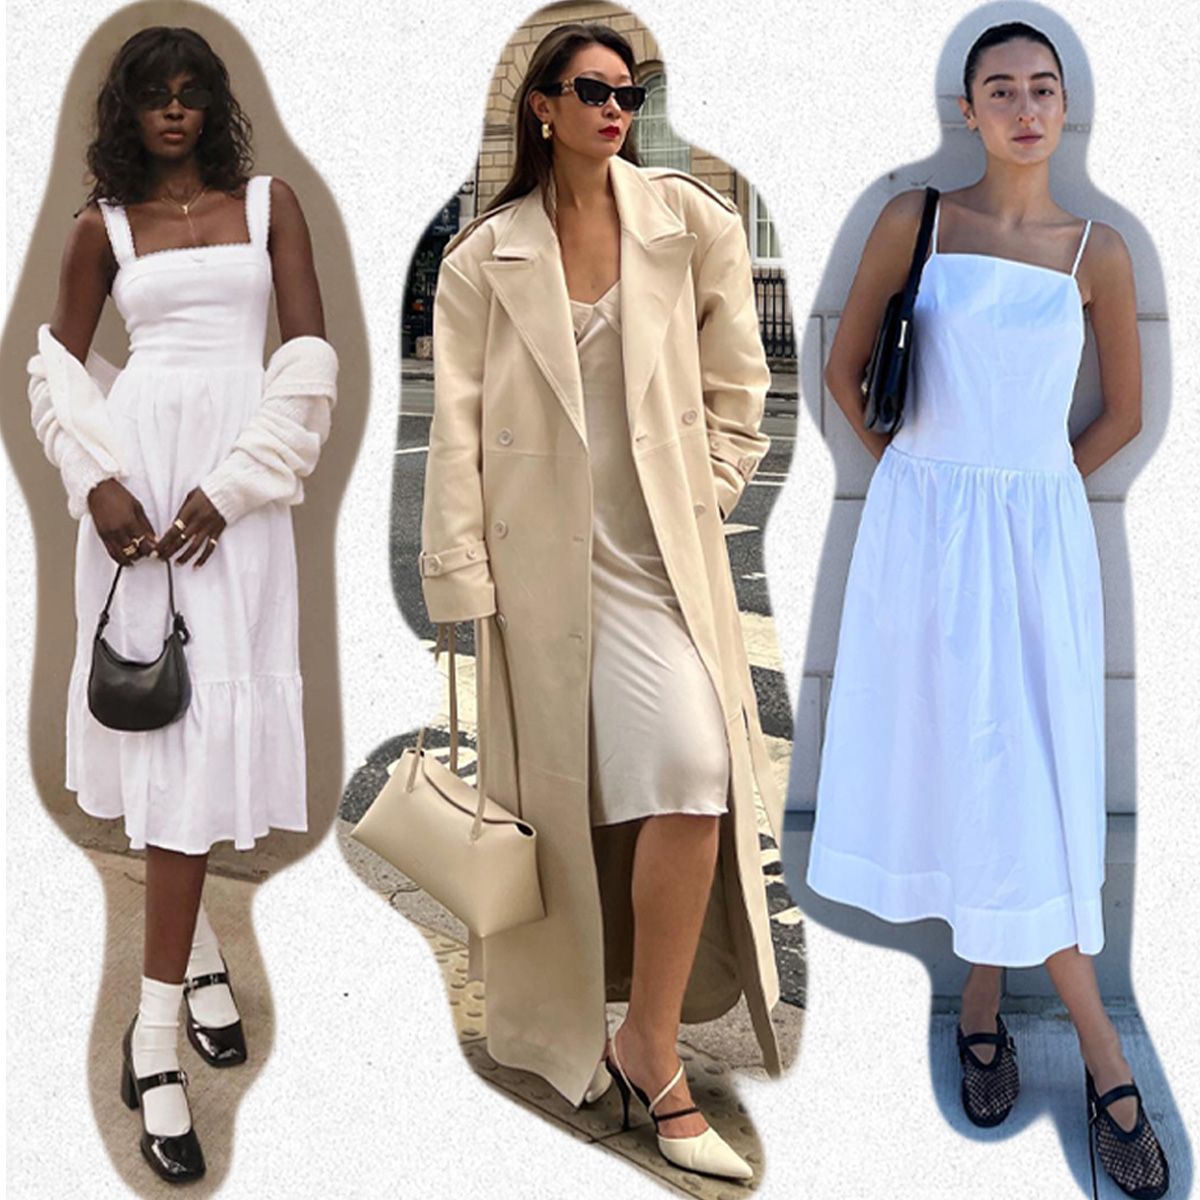 16 White Dress Outfits Worth Recreating